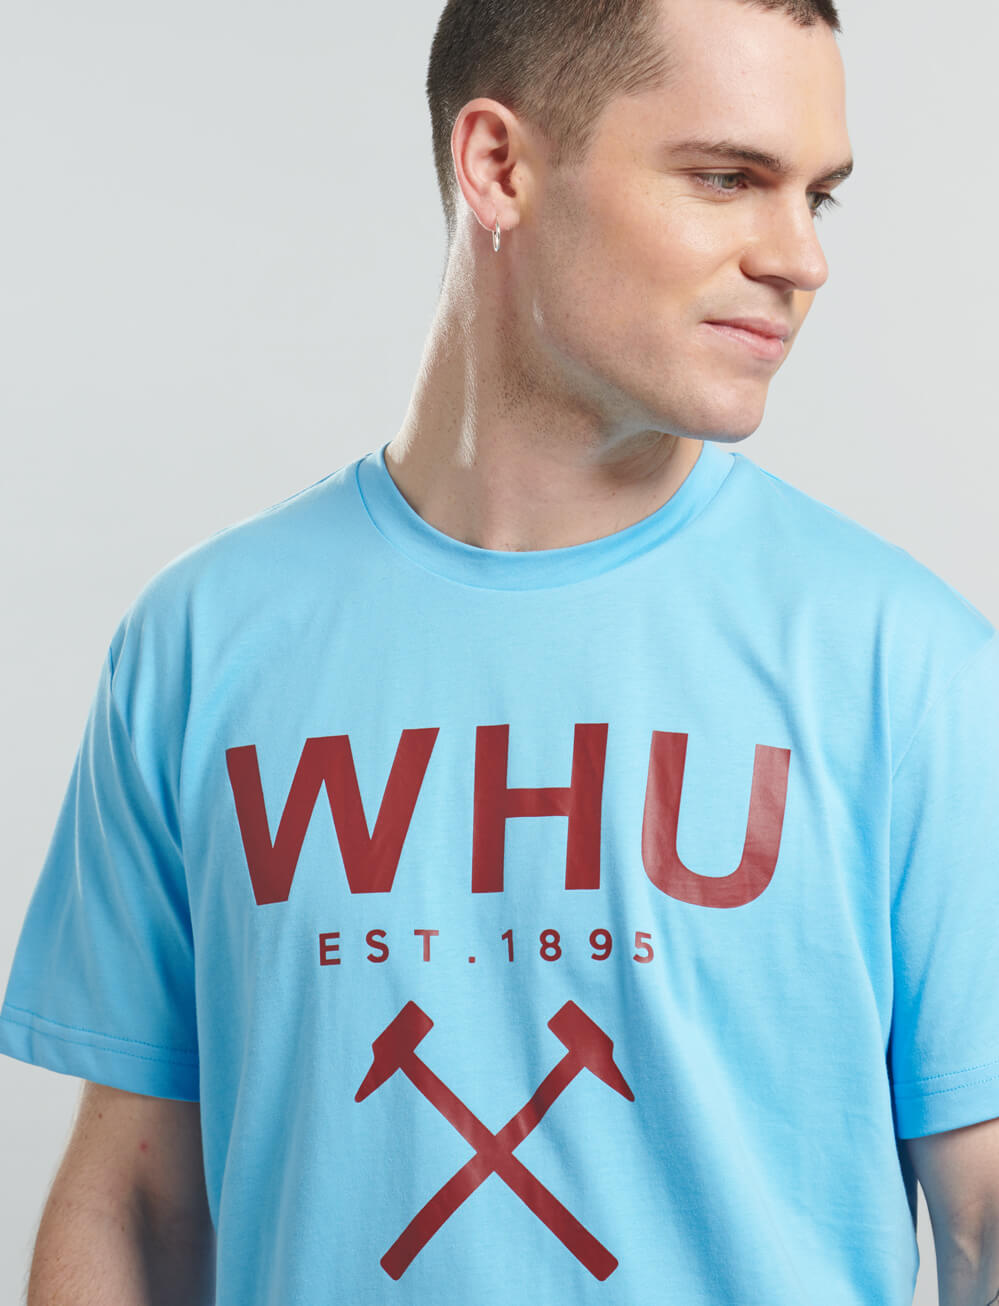 Official West Ham United Graphic T-shirt - Blue - The World Football Store